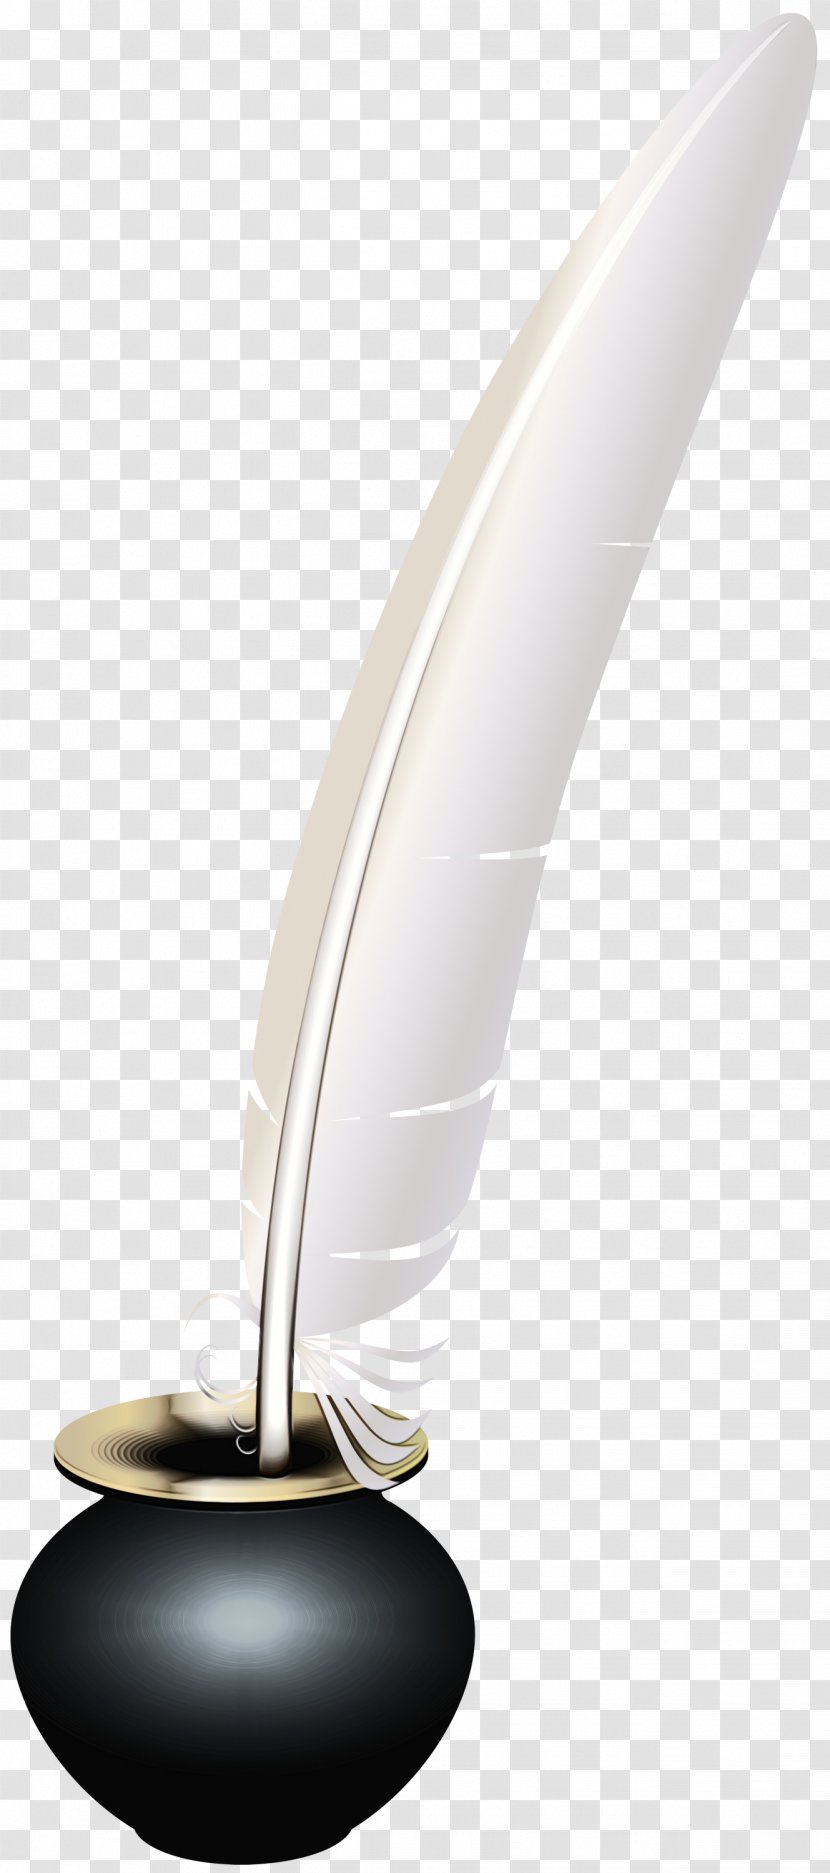 Writing Cartoon - Paper - Feather Implement Transparent PNG